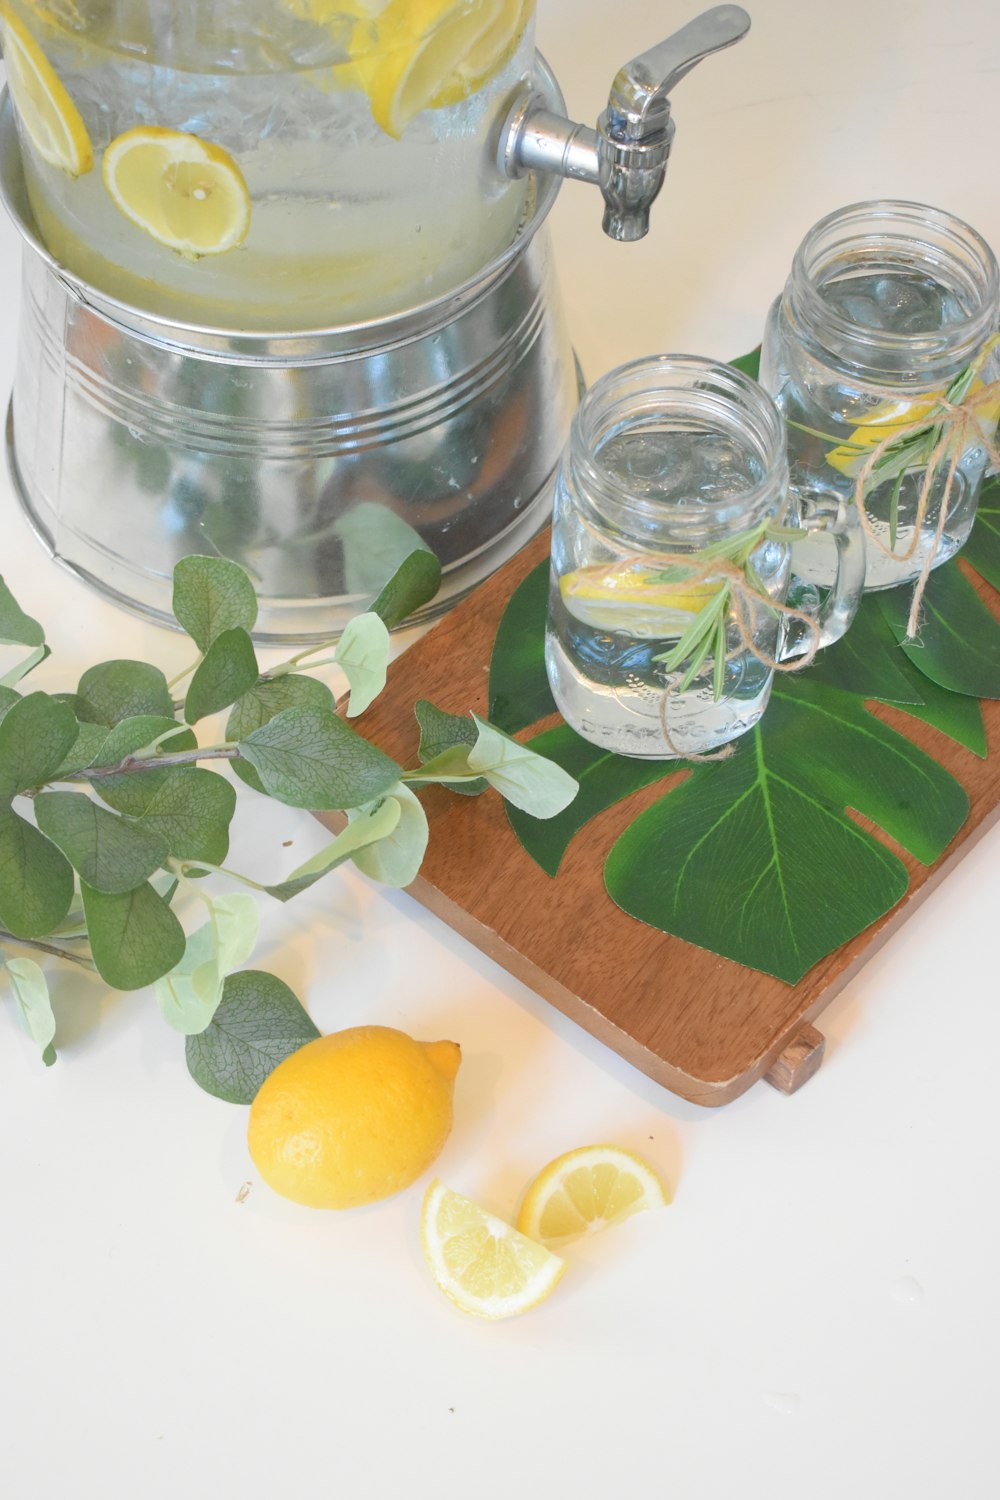 clear glass jar with green leaves beside clear glass jar with yellow liquid